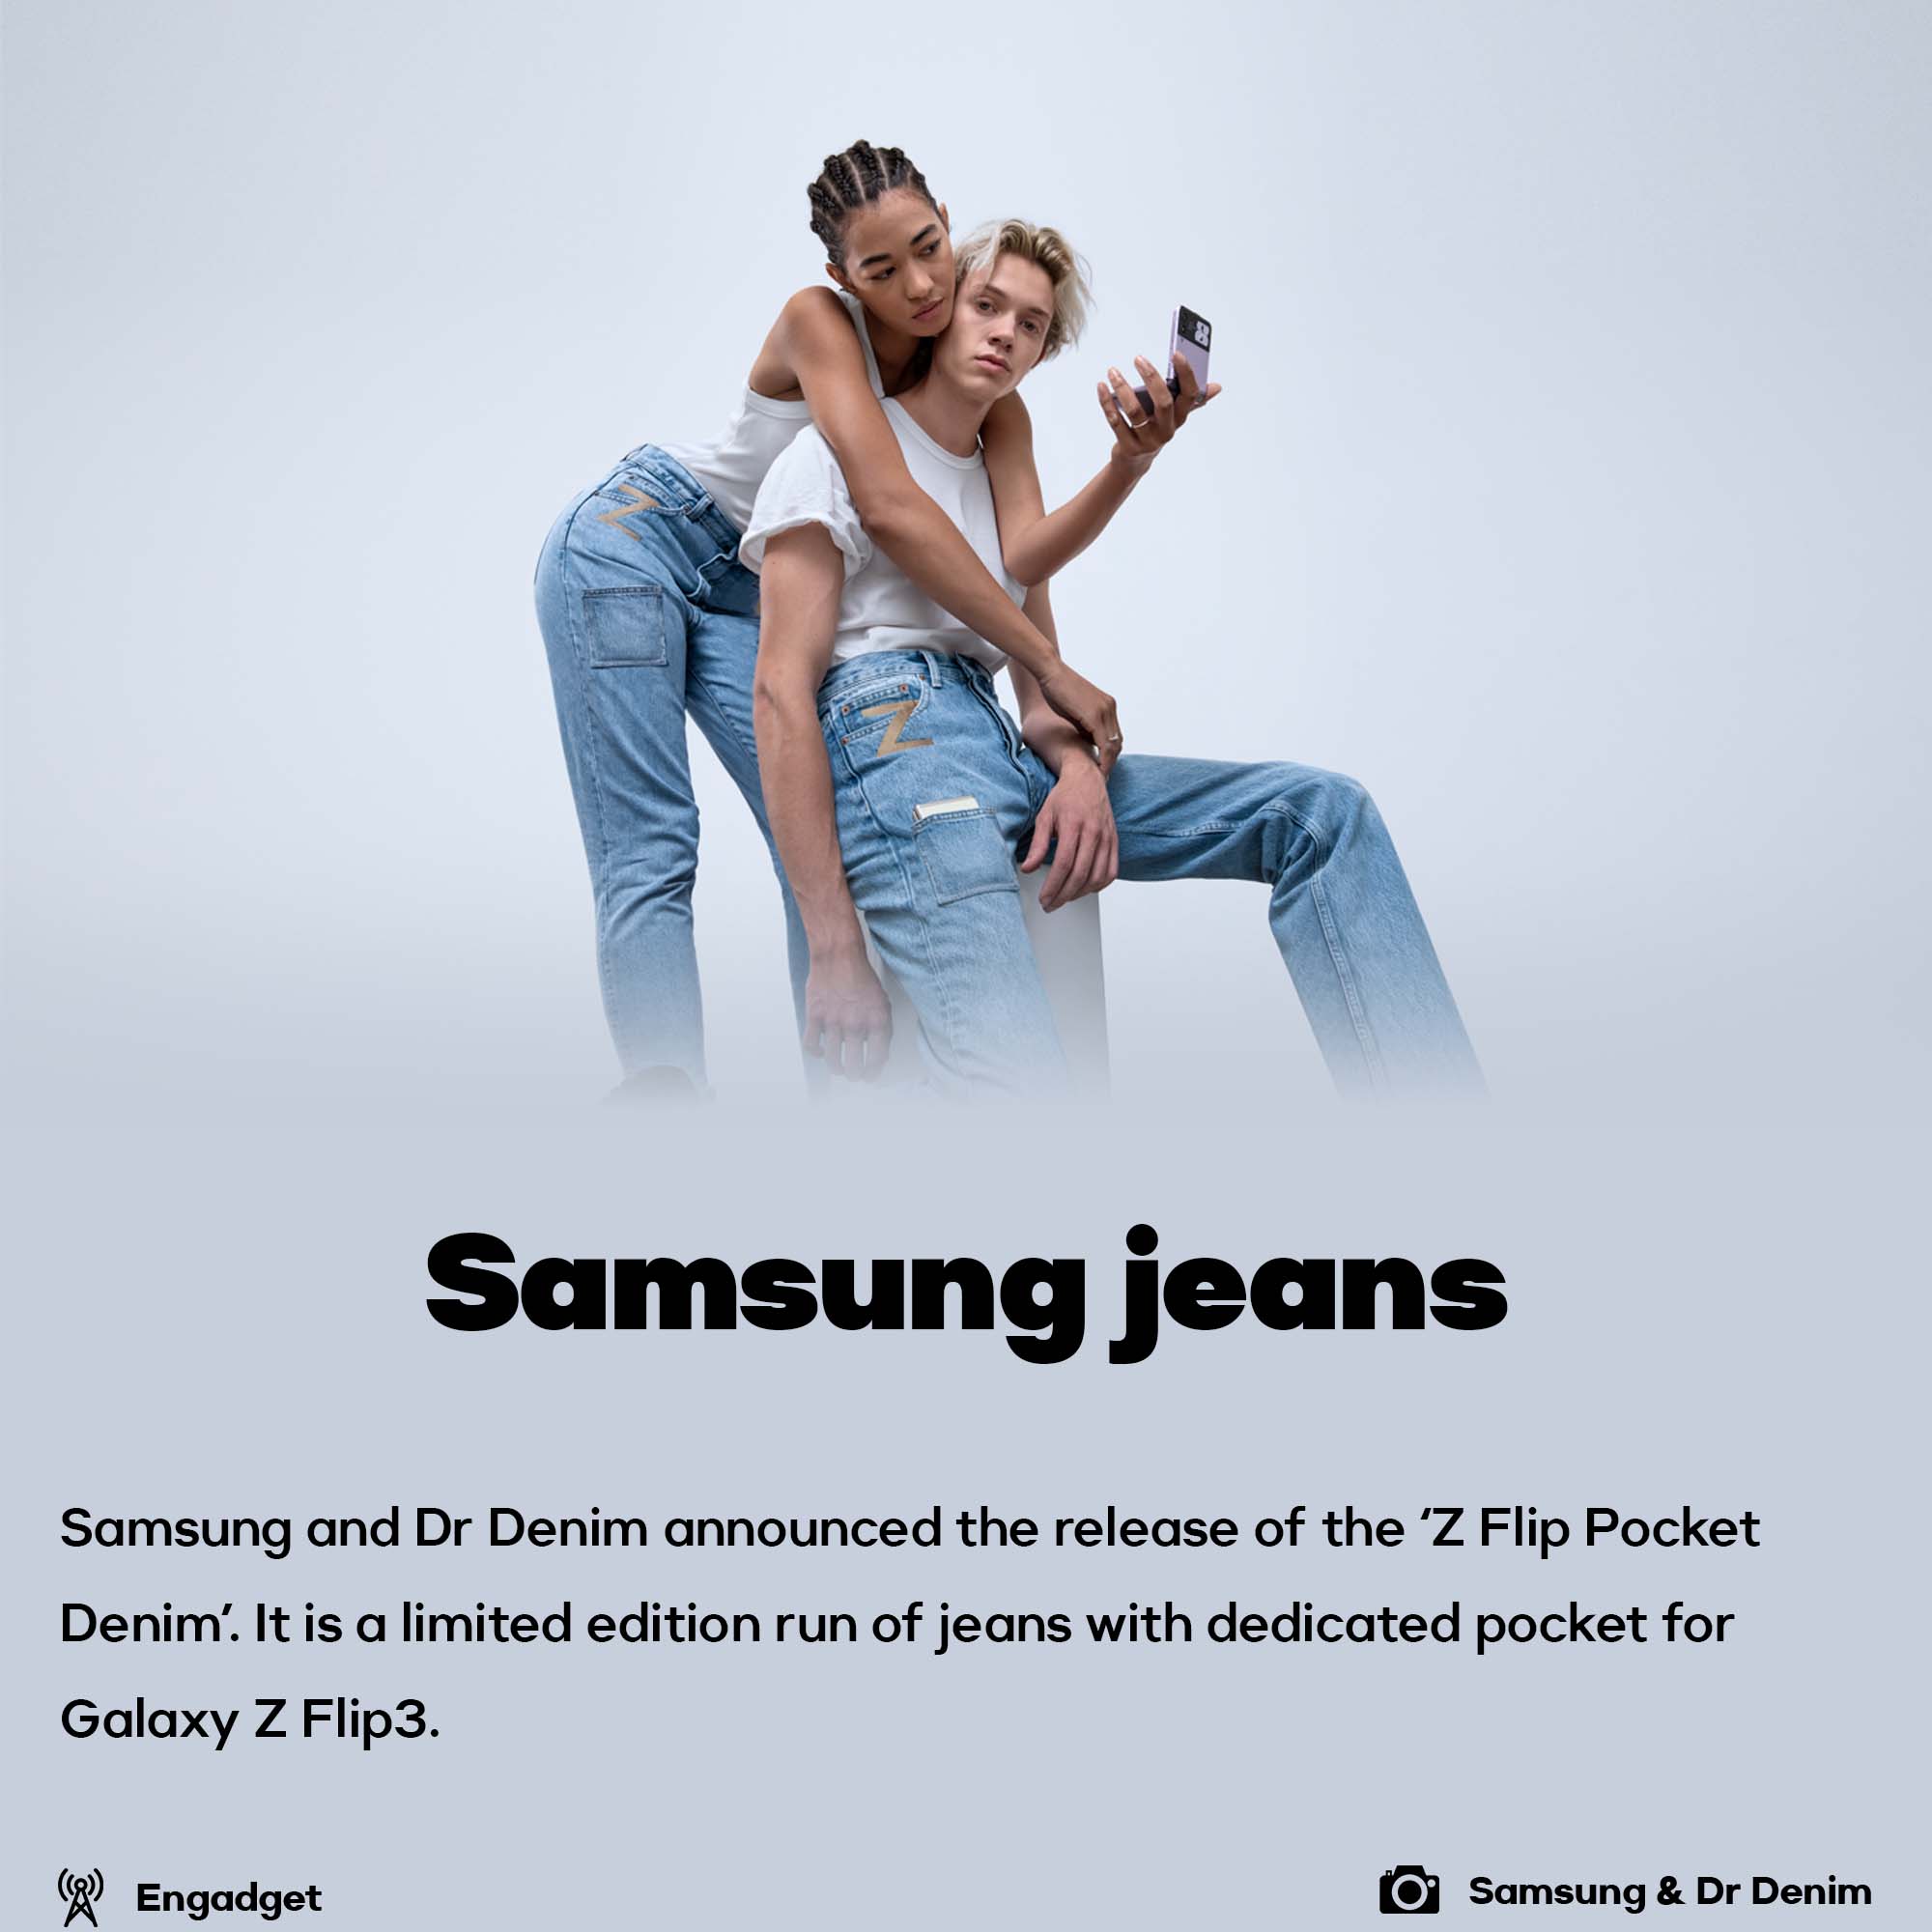 Samsung and Dr Denim released limited edition of jeans with special pocket for Samsung Galaxy Z Flip 3